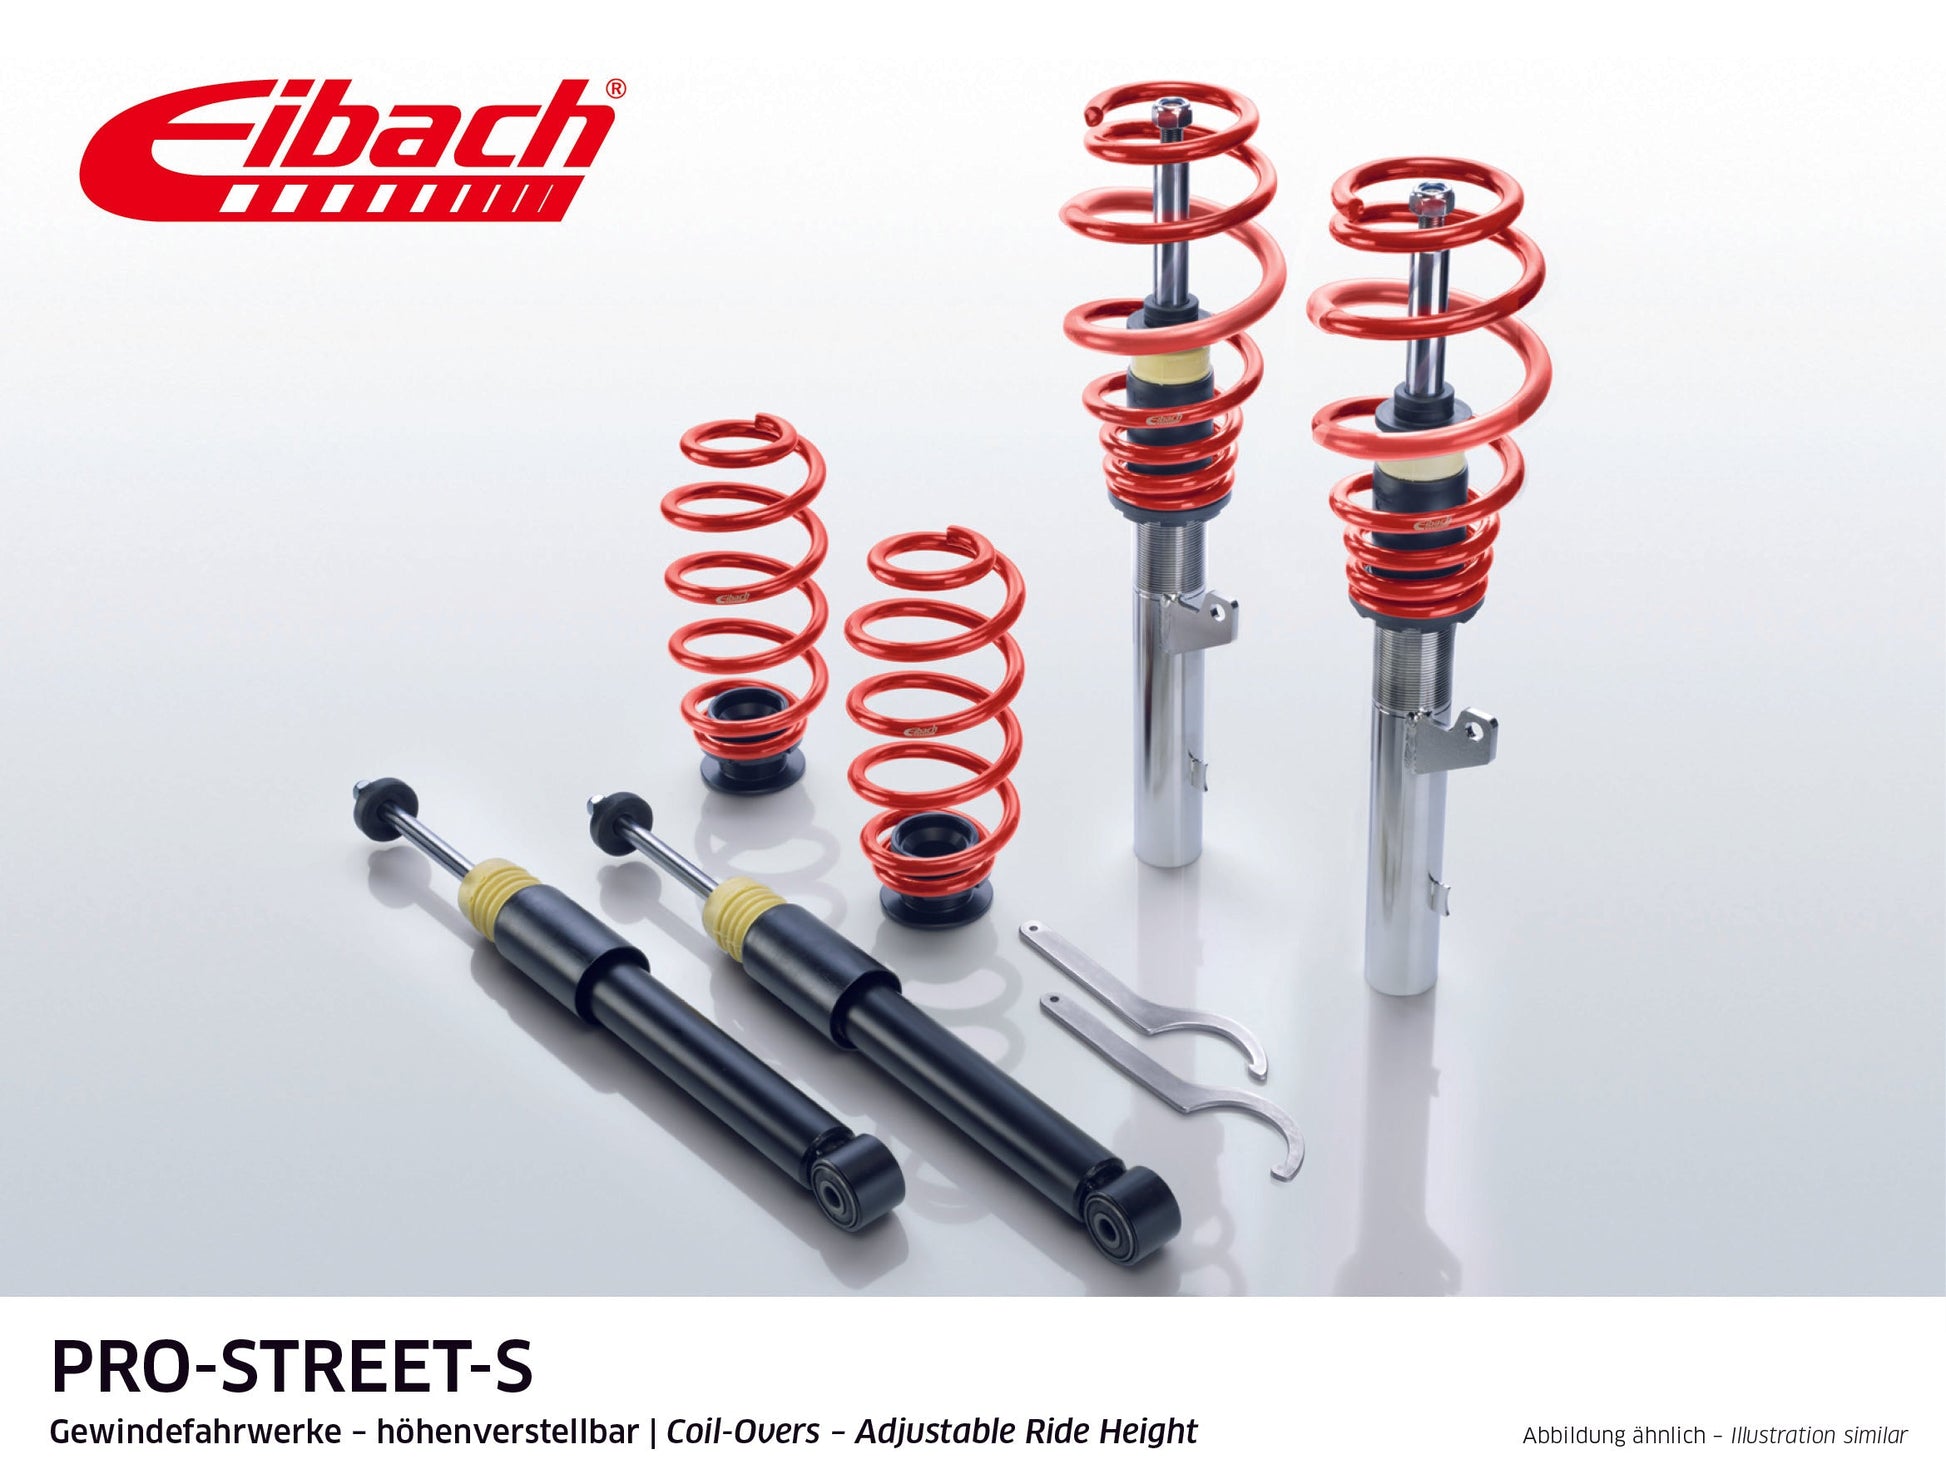 Eibach Pro-Street Coilover (PSS65-15-022-02-22) at £973.99